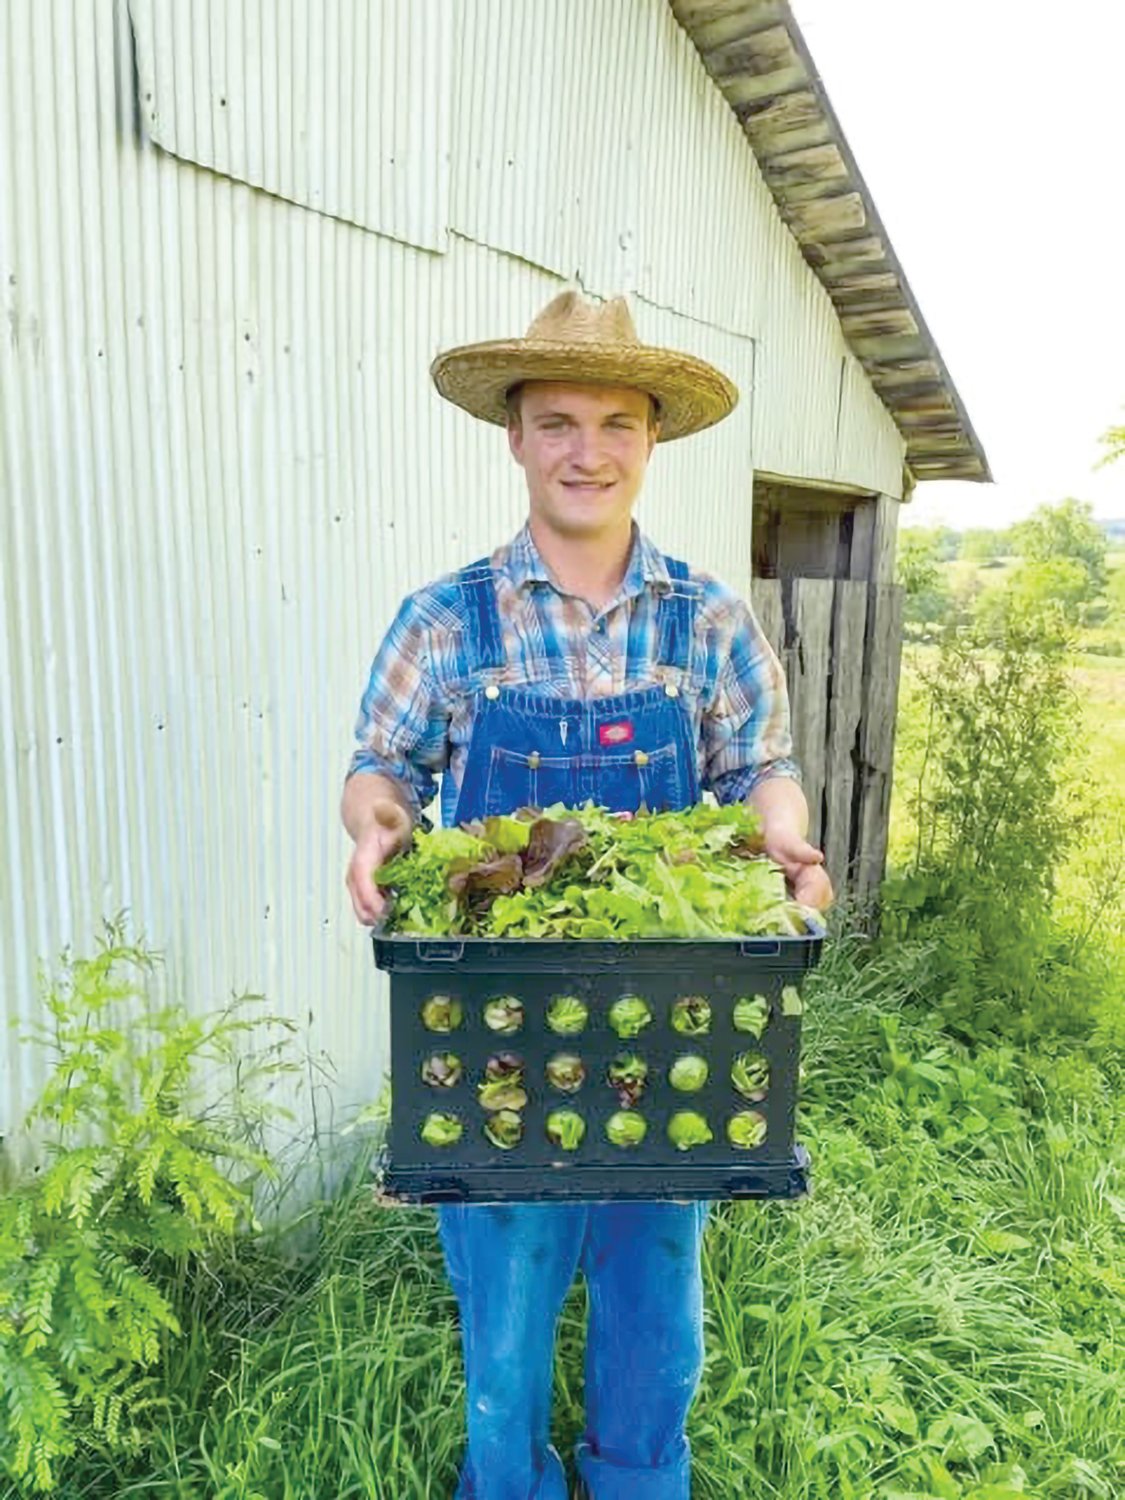 Jacob Lockcuff holds a crate full of greens pulled up for customers.